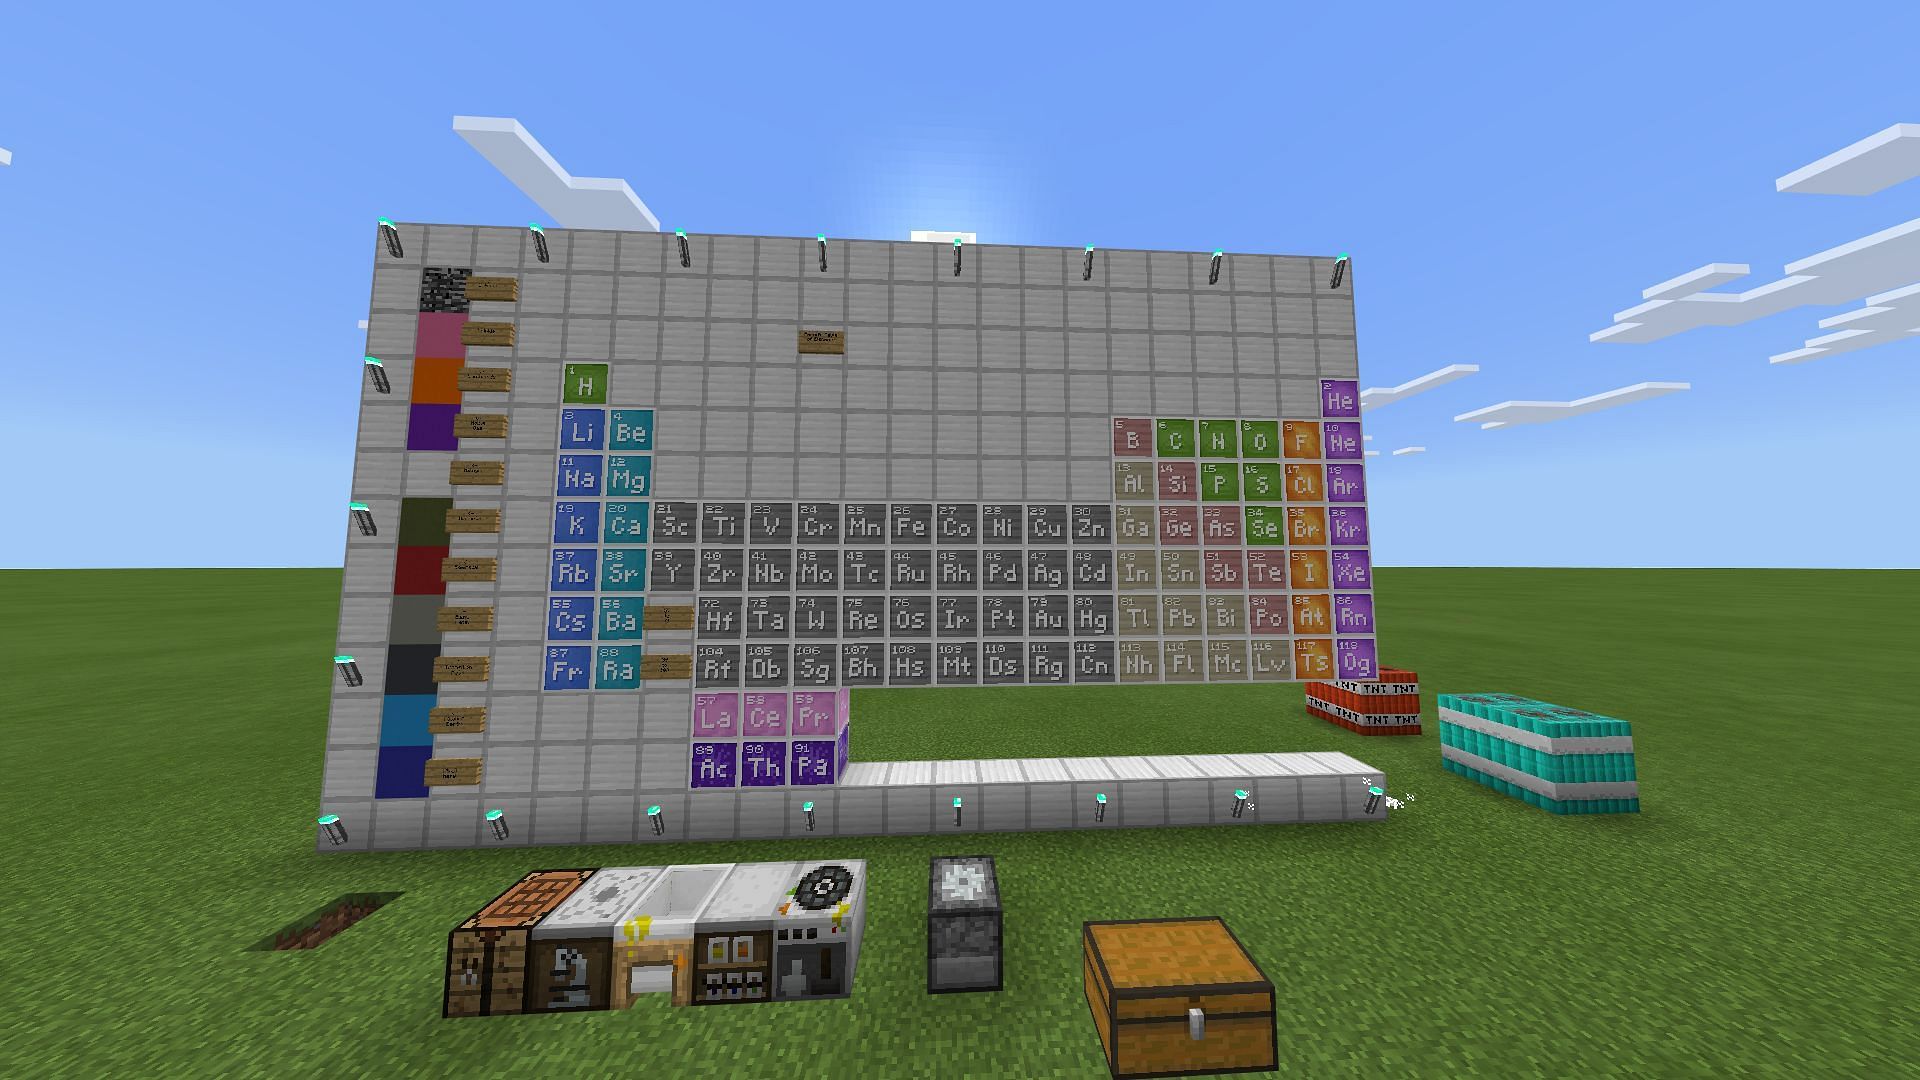 Chemistry is an essential part of Education Edition (Image via Minecraft)